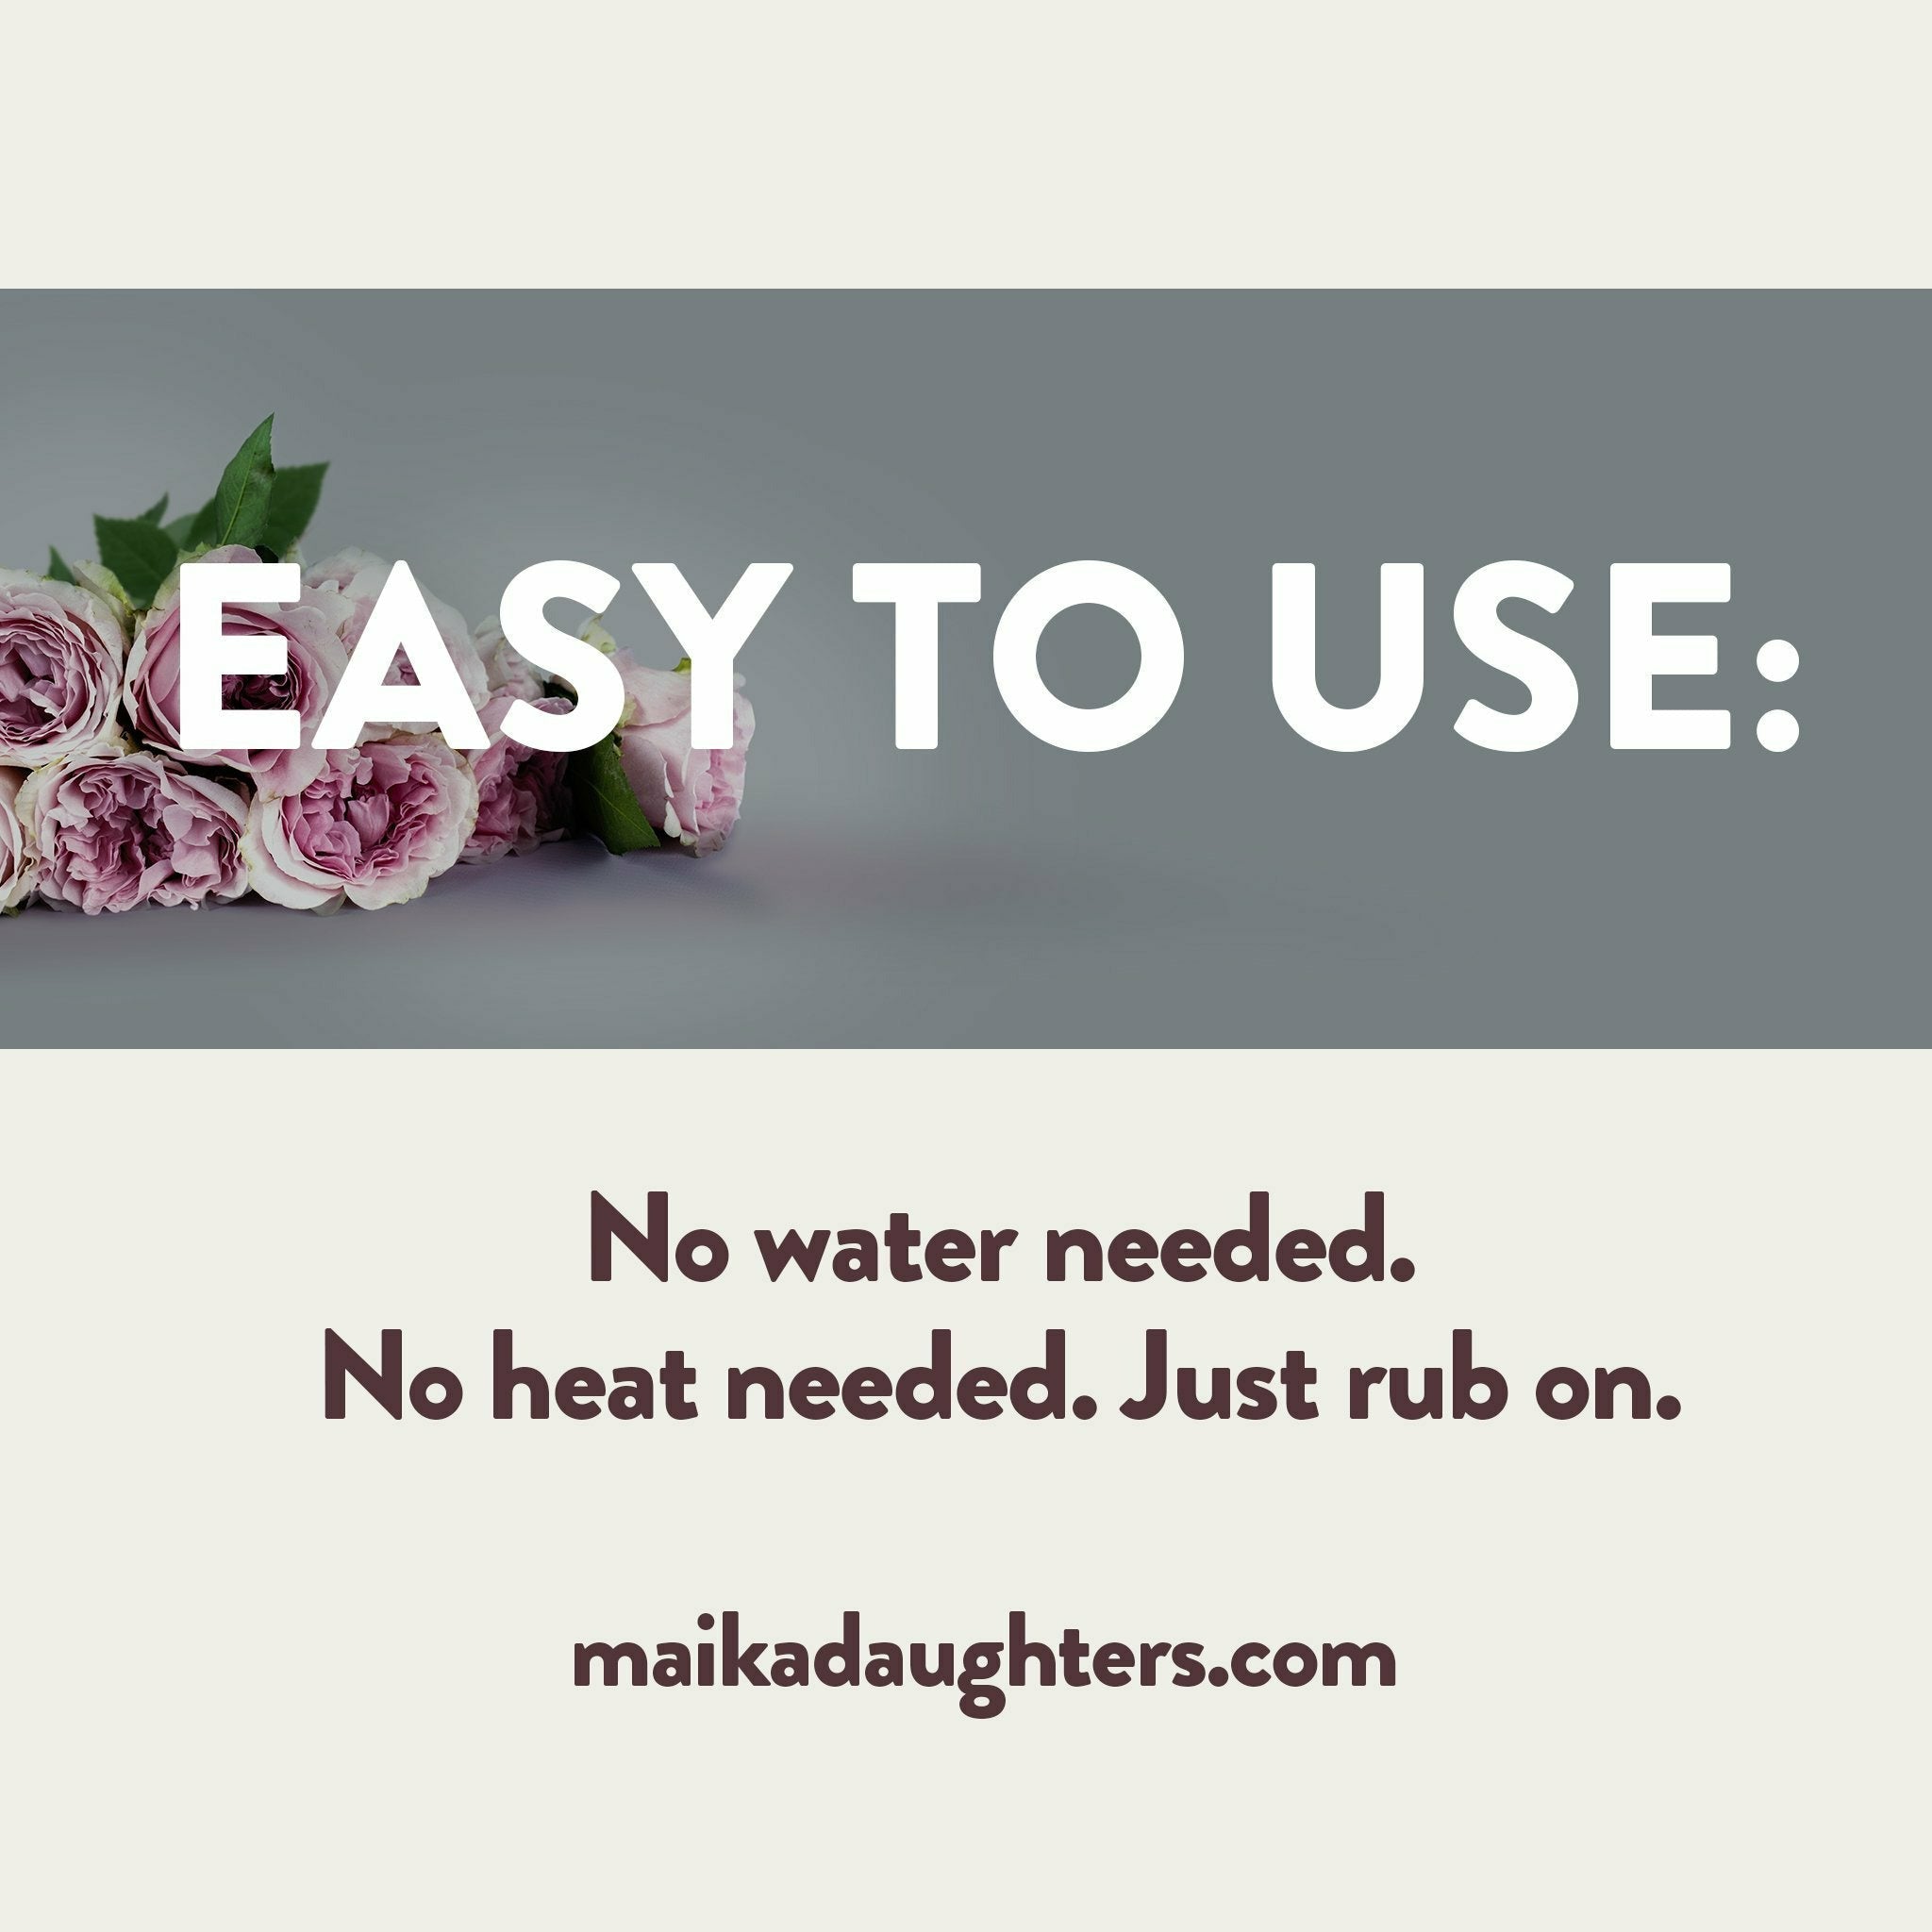 A solid white background with a gray stripe with roses and white text reading: Easy to use. Underneath is brown text reading: No water needed. No heat needed. Just rub on. maikadaughters.com